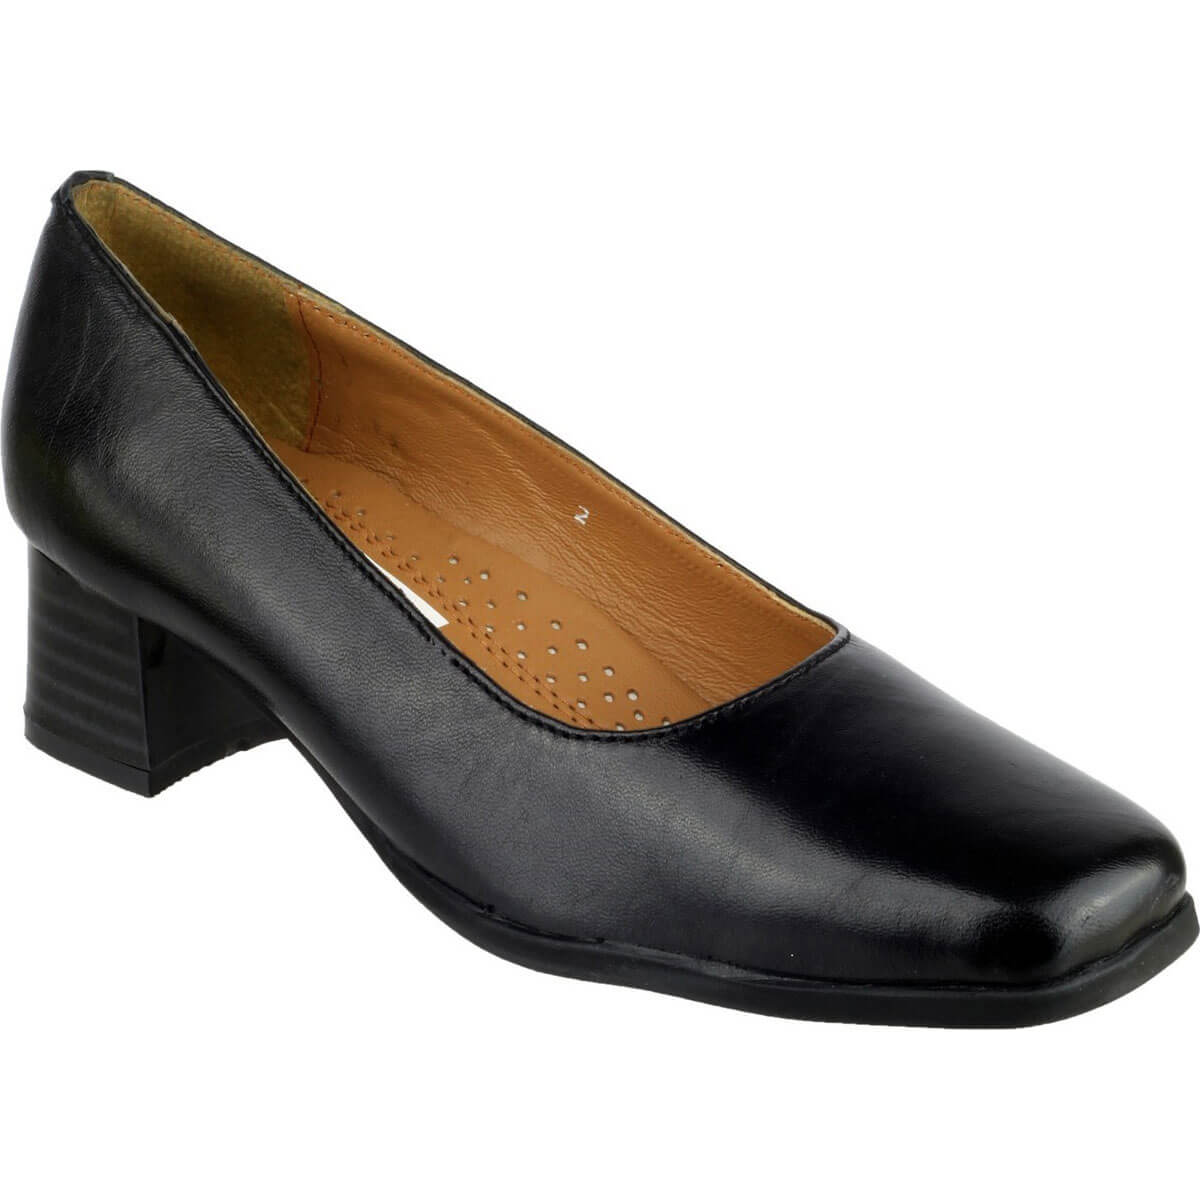 Image of Amblers Walford Ladies Shoes Leather Court Black Size 6.5